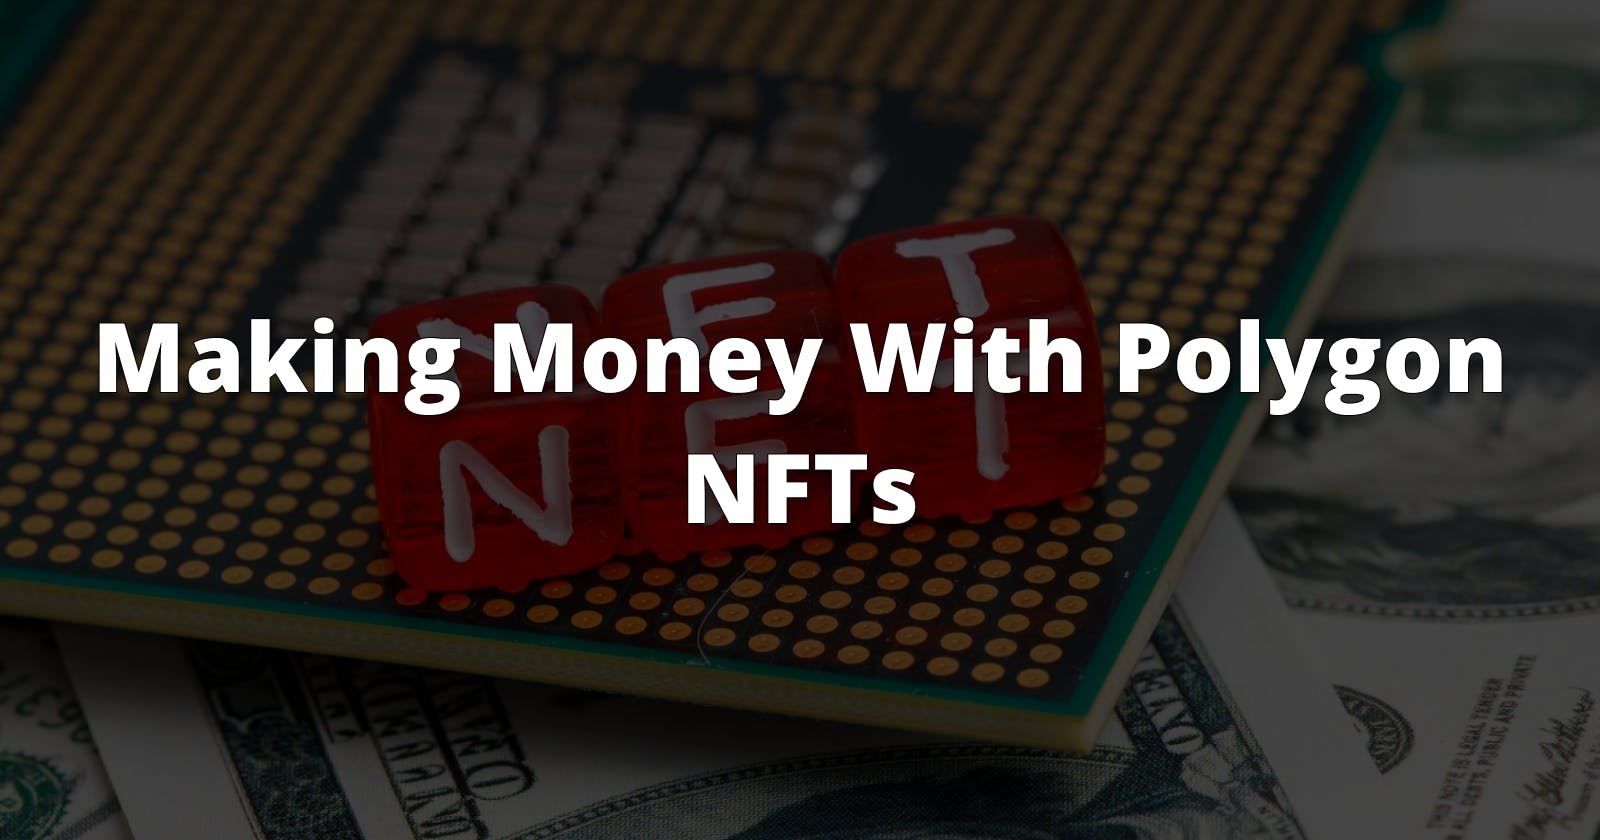 Making Money With Polygon NFTs